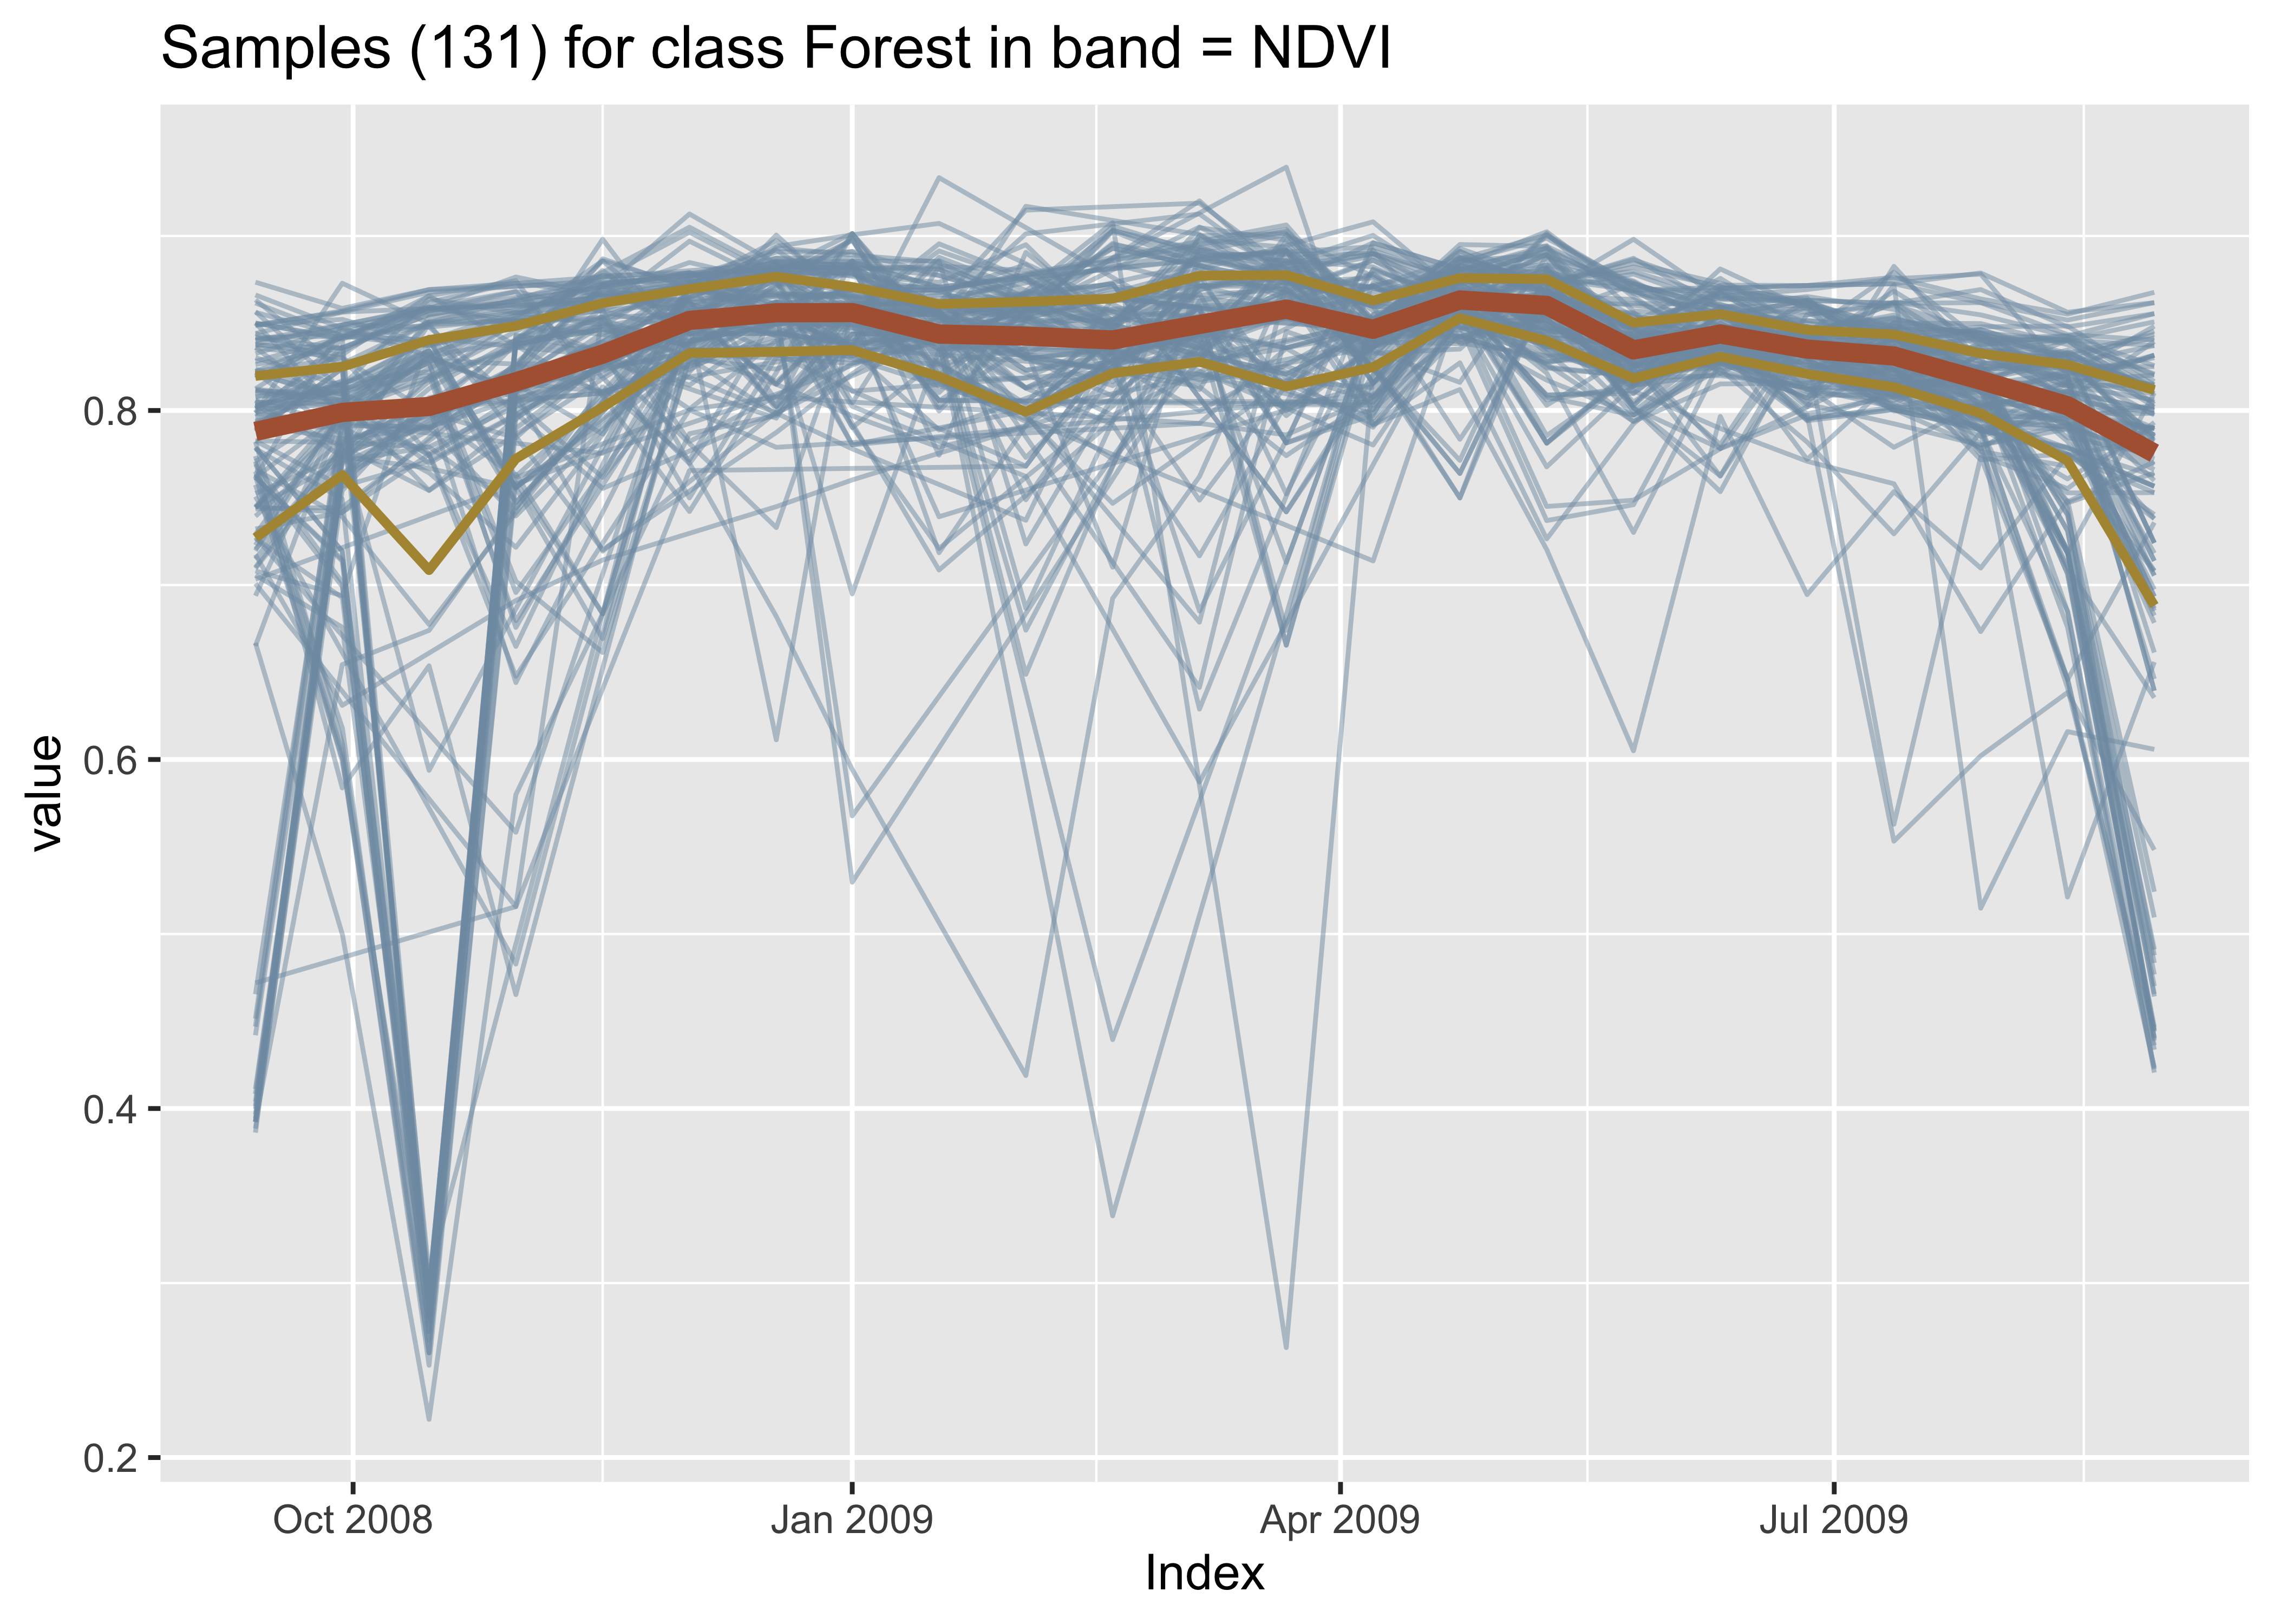 Joint plot of all samples in band NDVI for label Forest (Source: Authors).